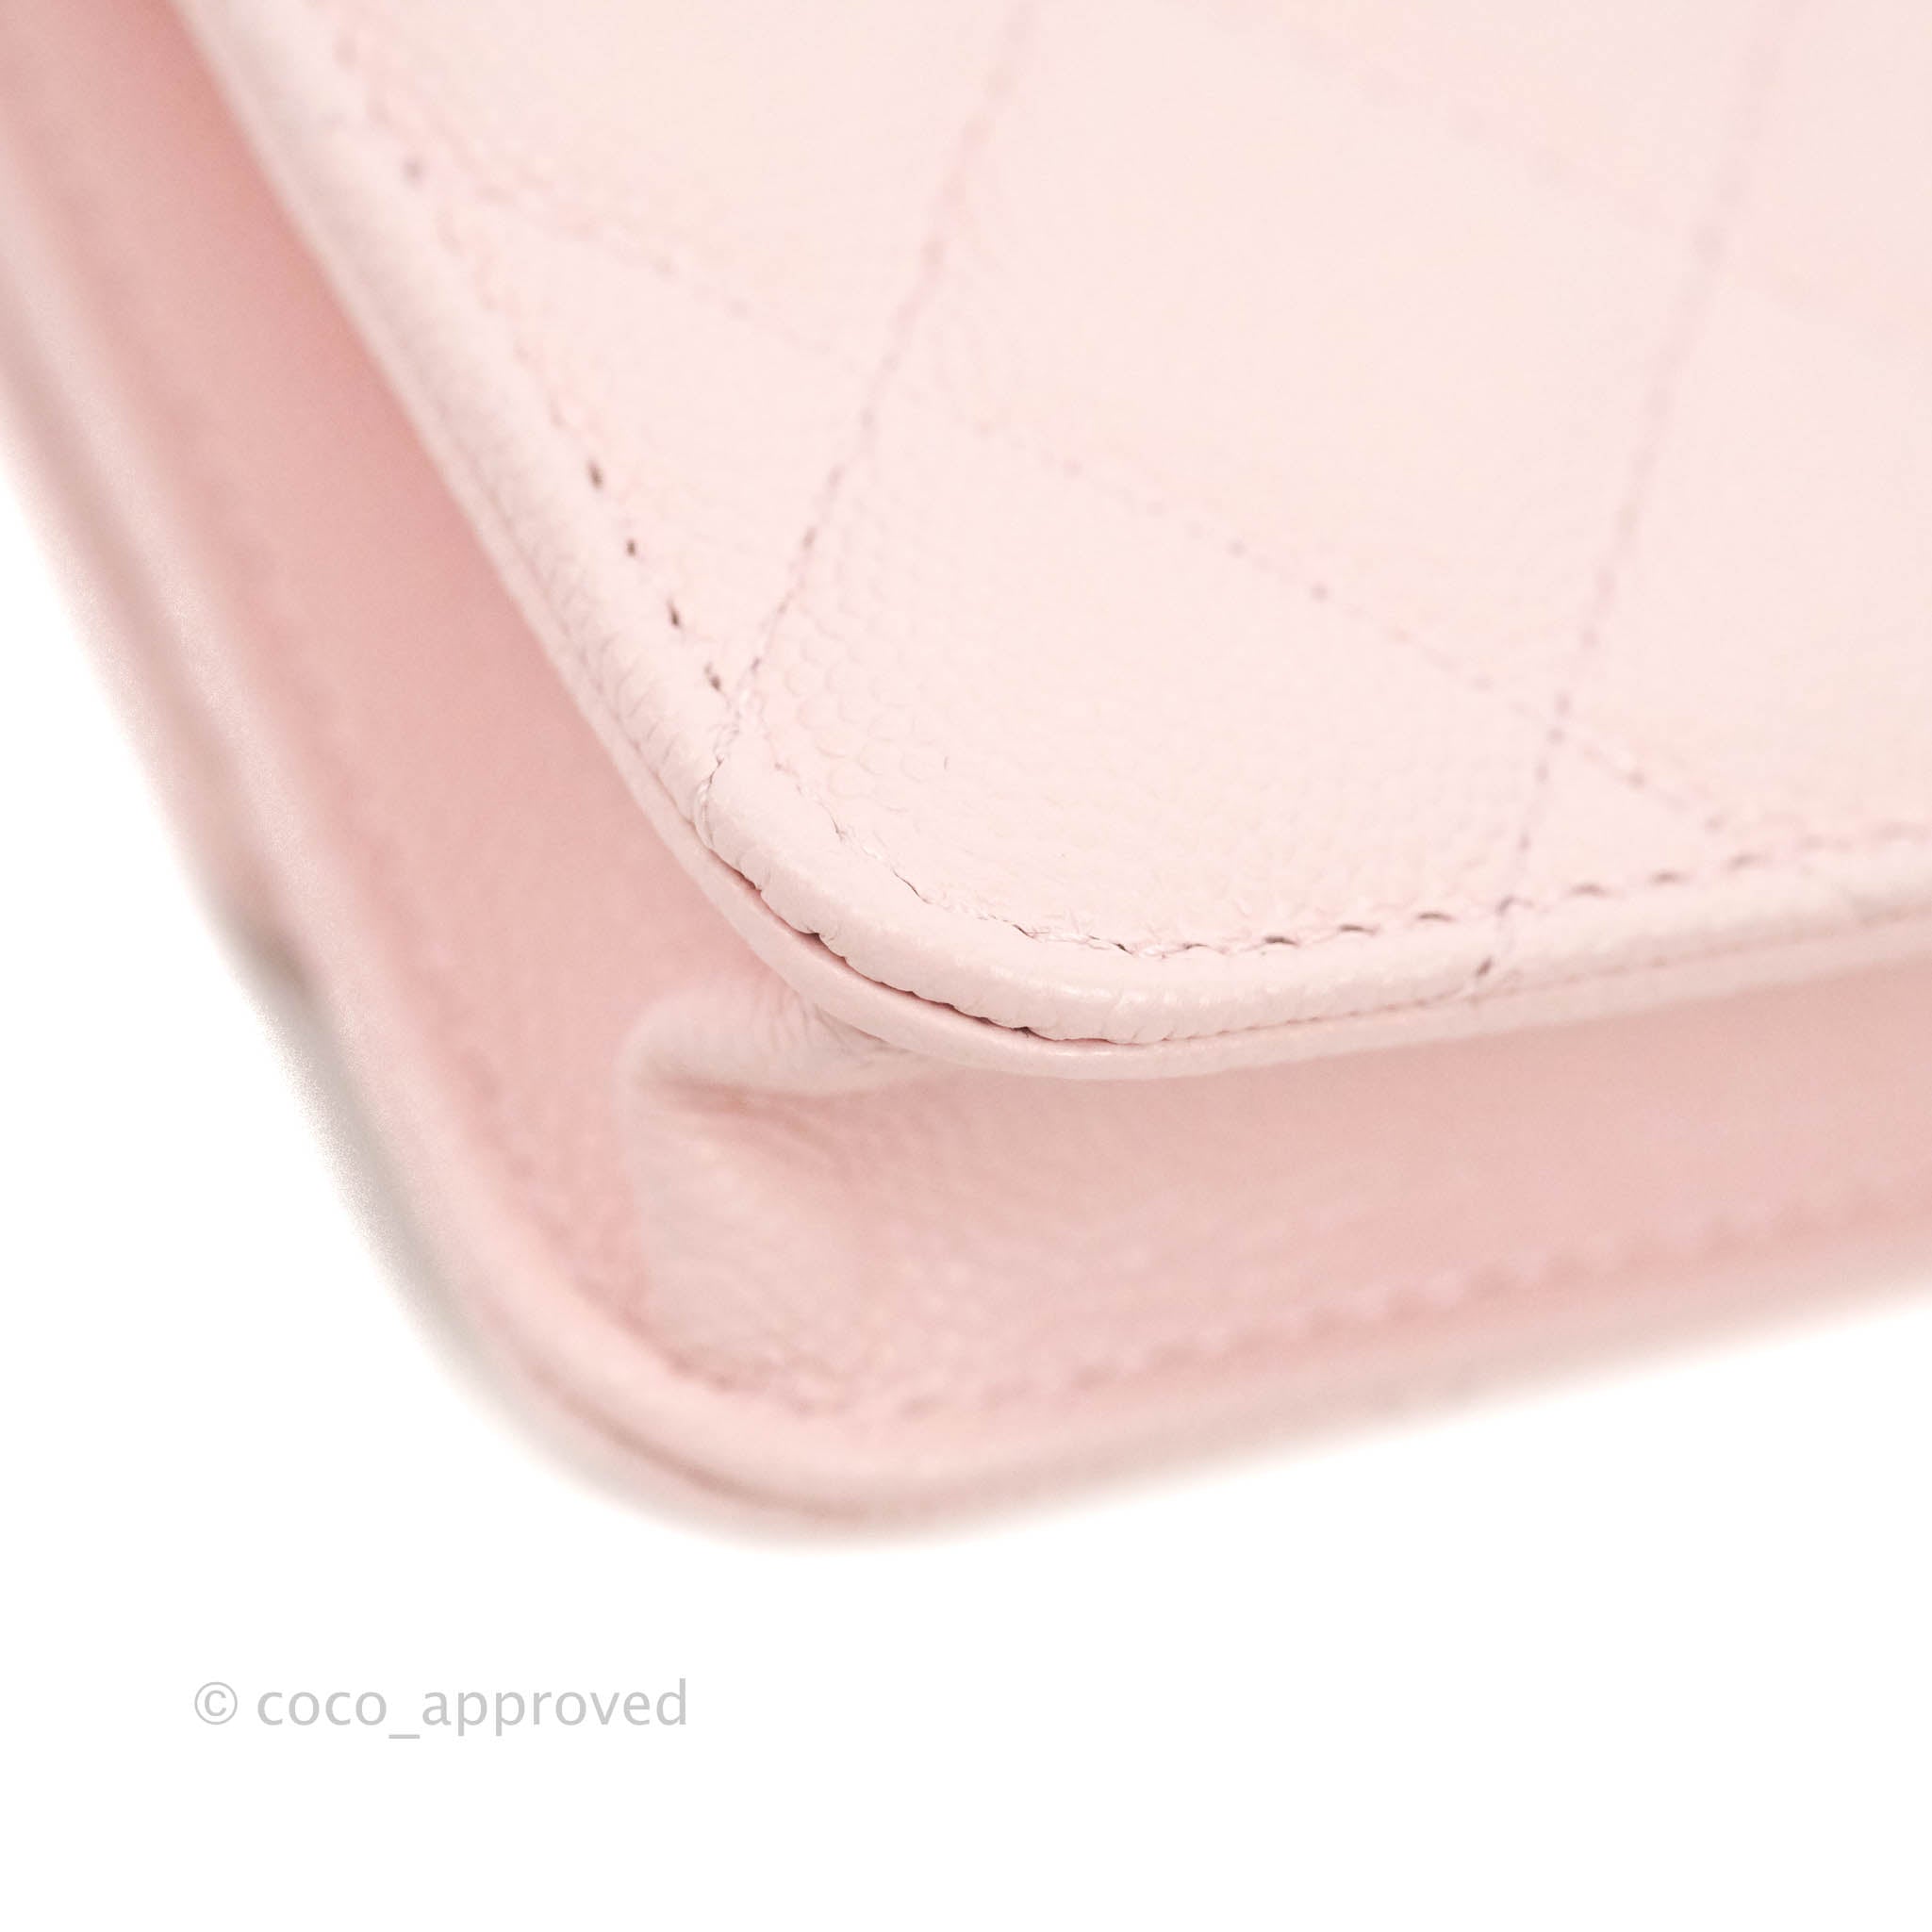 Chanel Pink Classic Quilted Wallet on Chain Caviar Calfskin